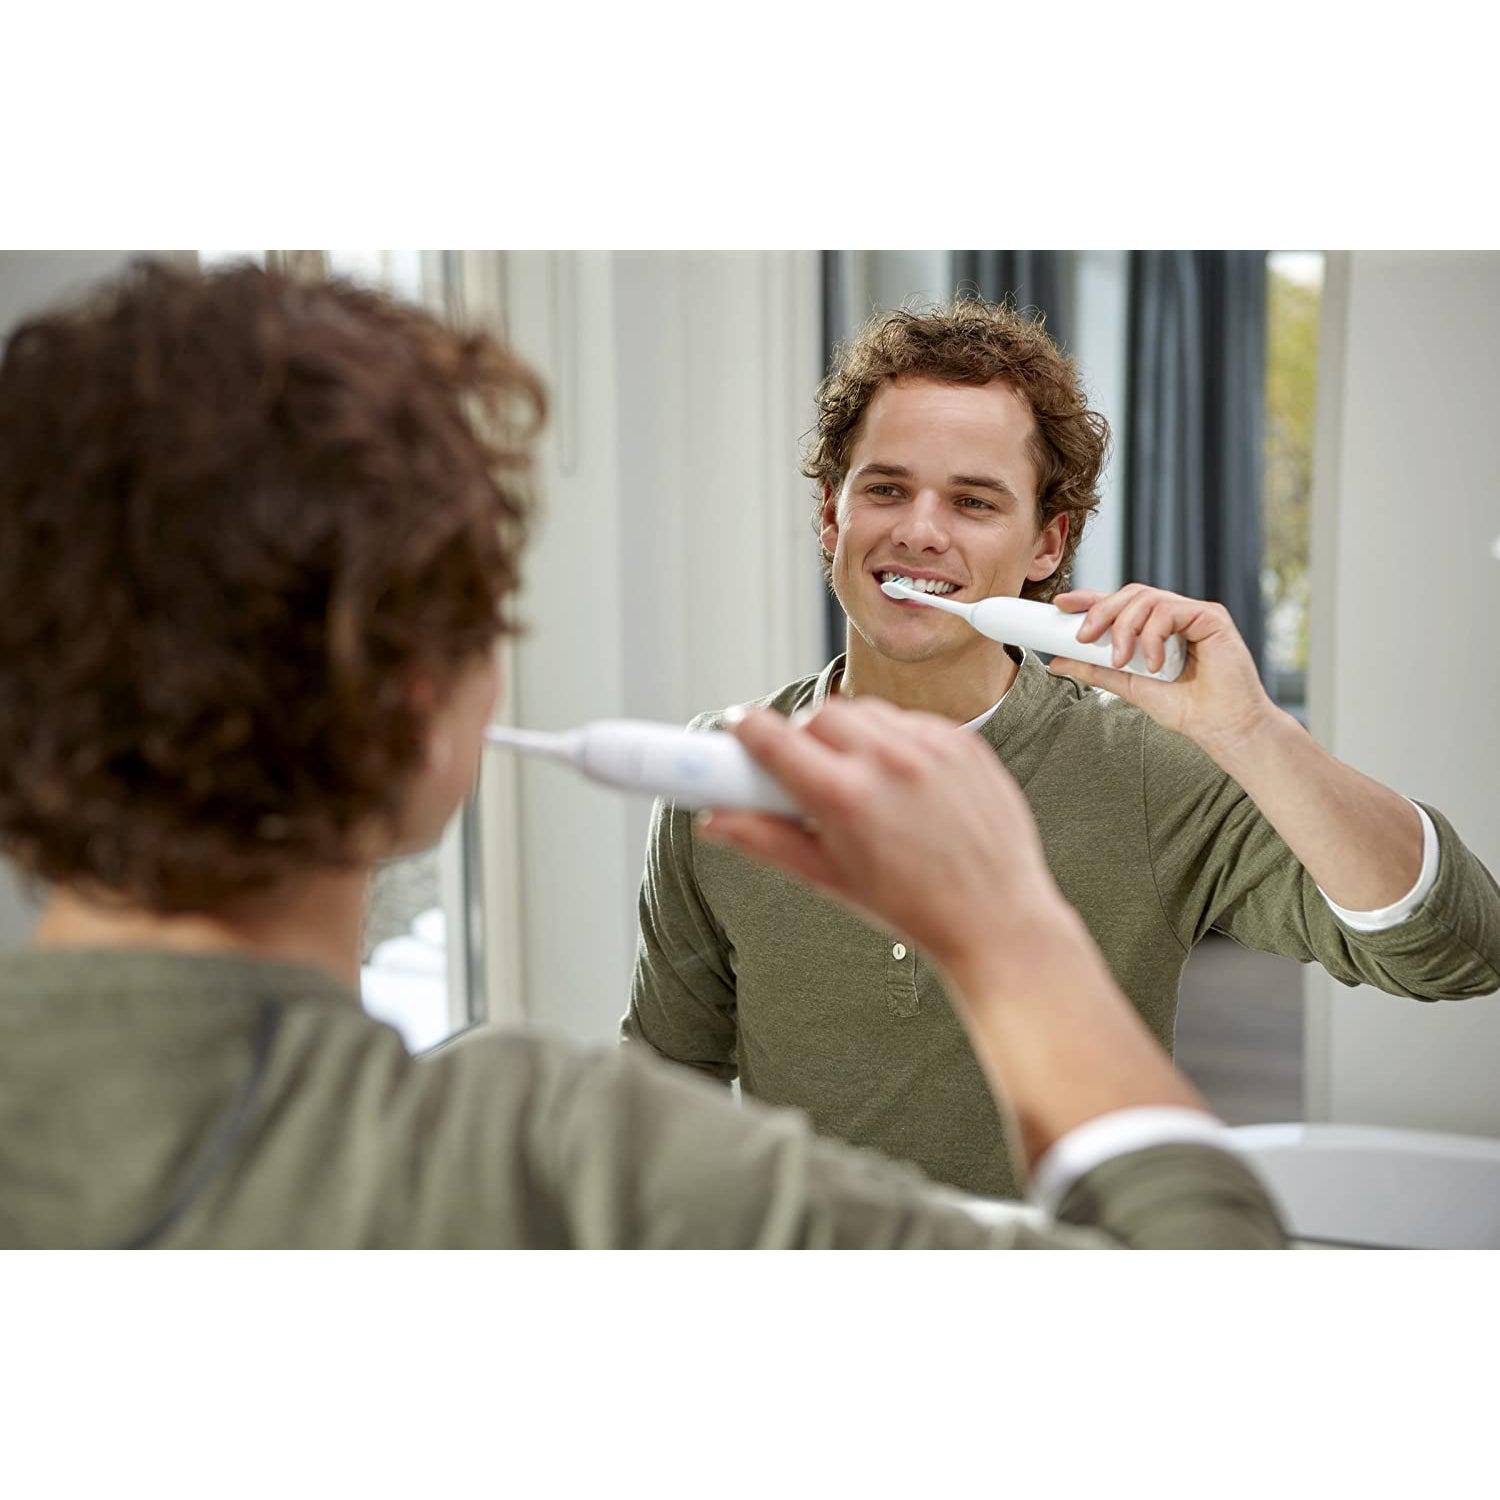 Philips Sonicare Clean Care HX3212/03 – Electric Toothbrush, Anti Plaque Defence -white and light blue - Healthxpress.ie